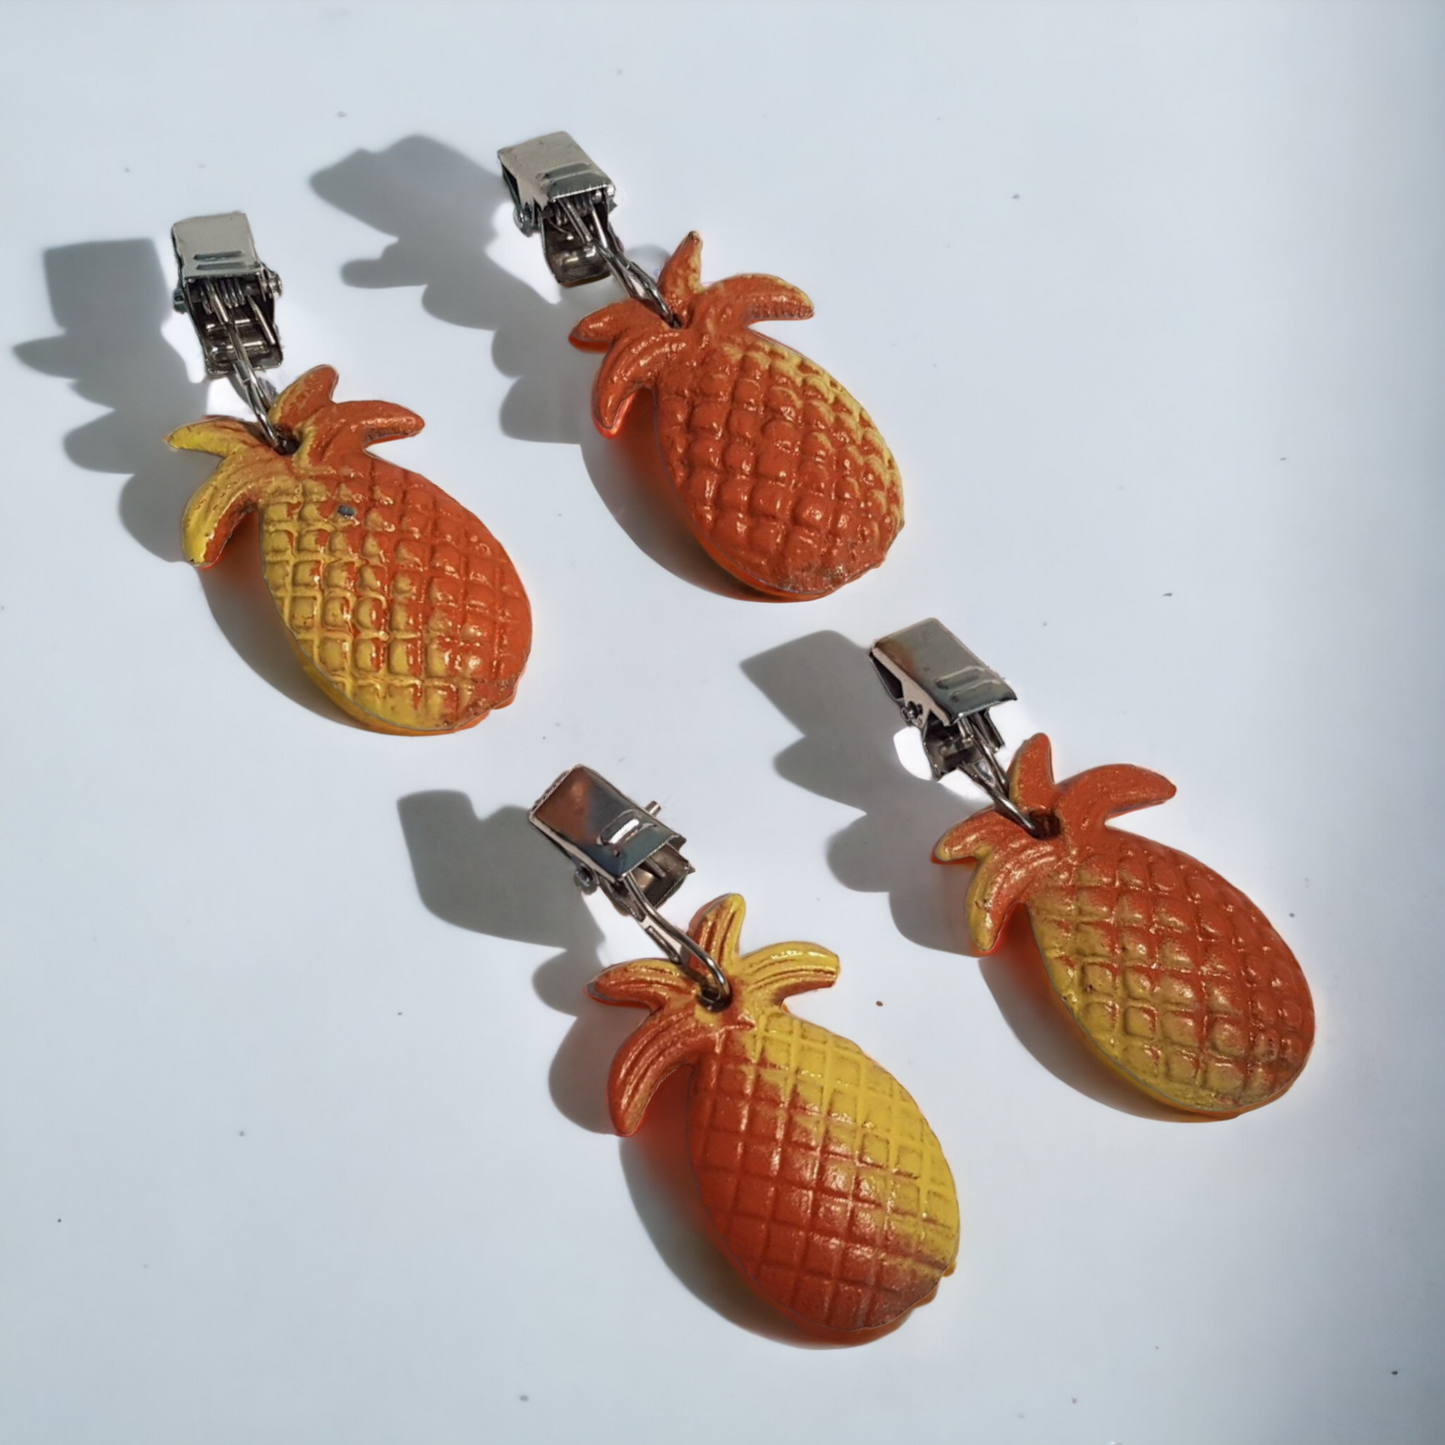 Tablecloth Weights & Clips Patio Table Weights Pineapples